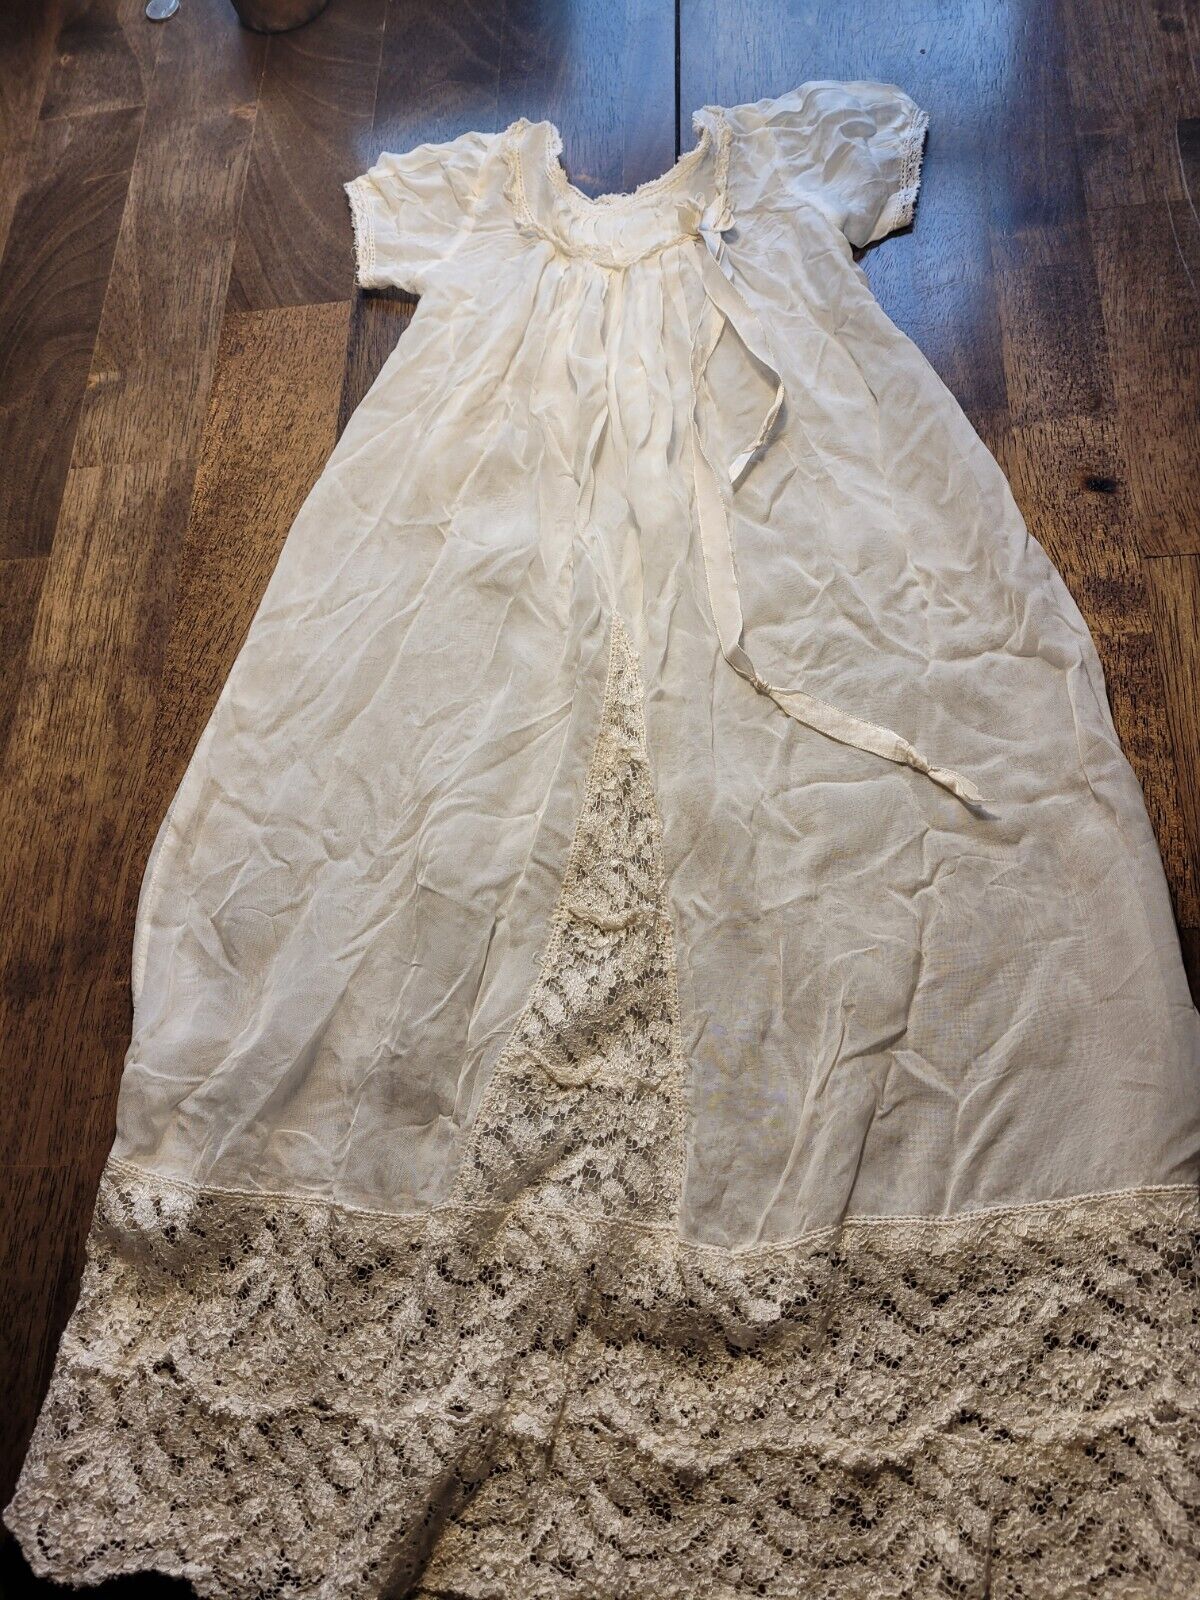 Vintage Antique Christening Gown Dress Baby Doll Inverted V Front Lace Panel